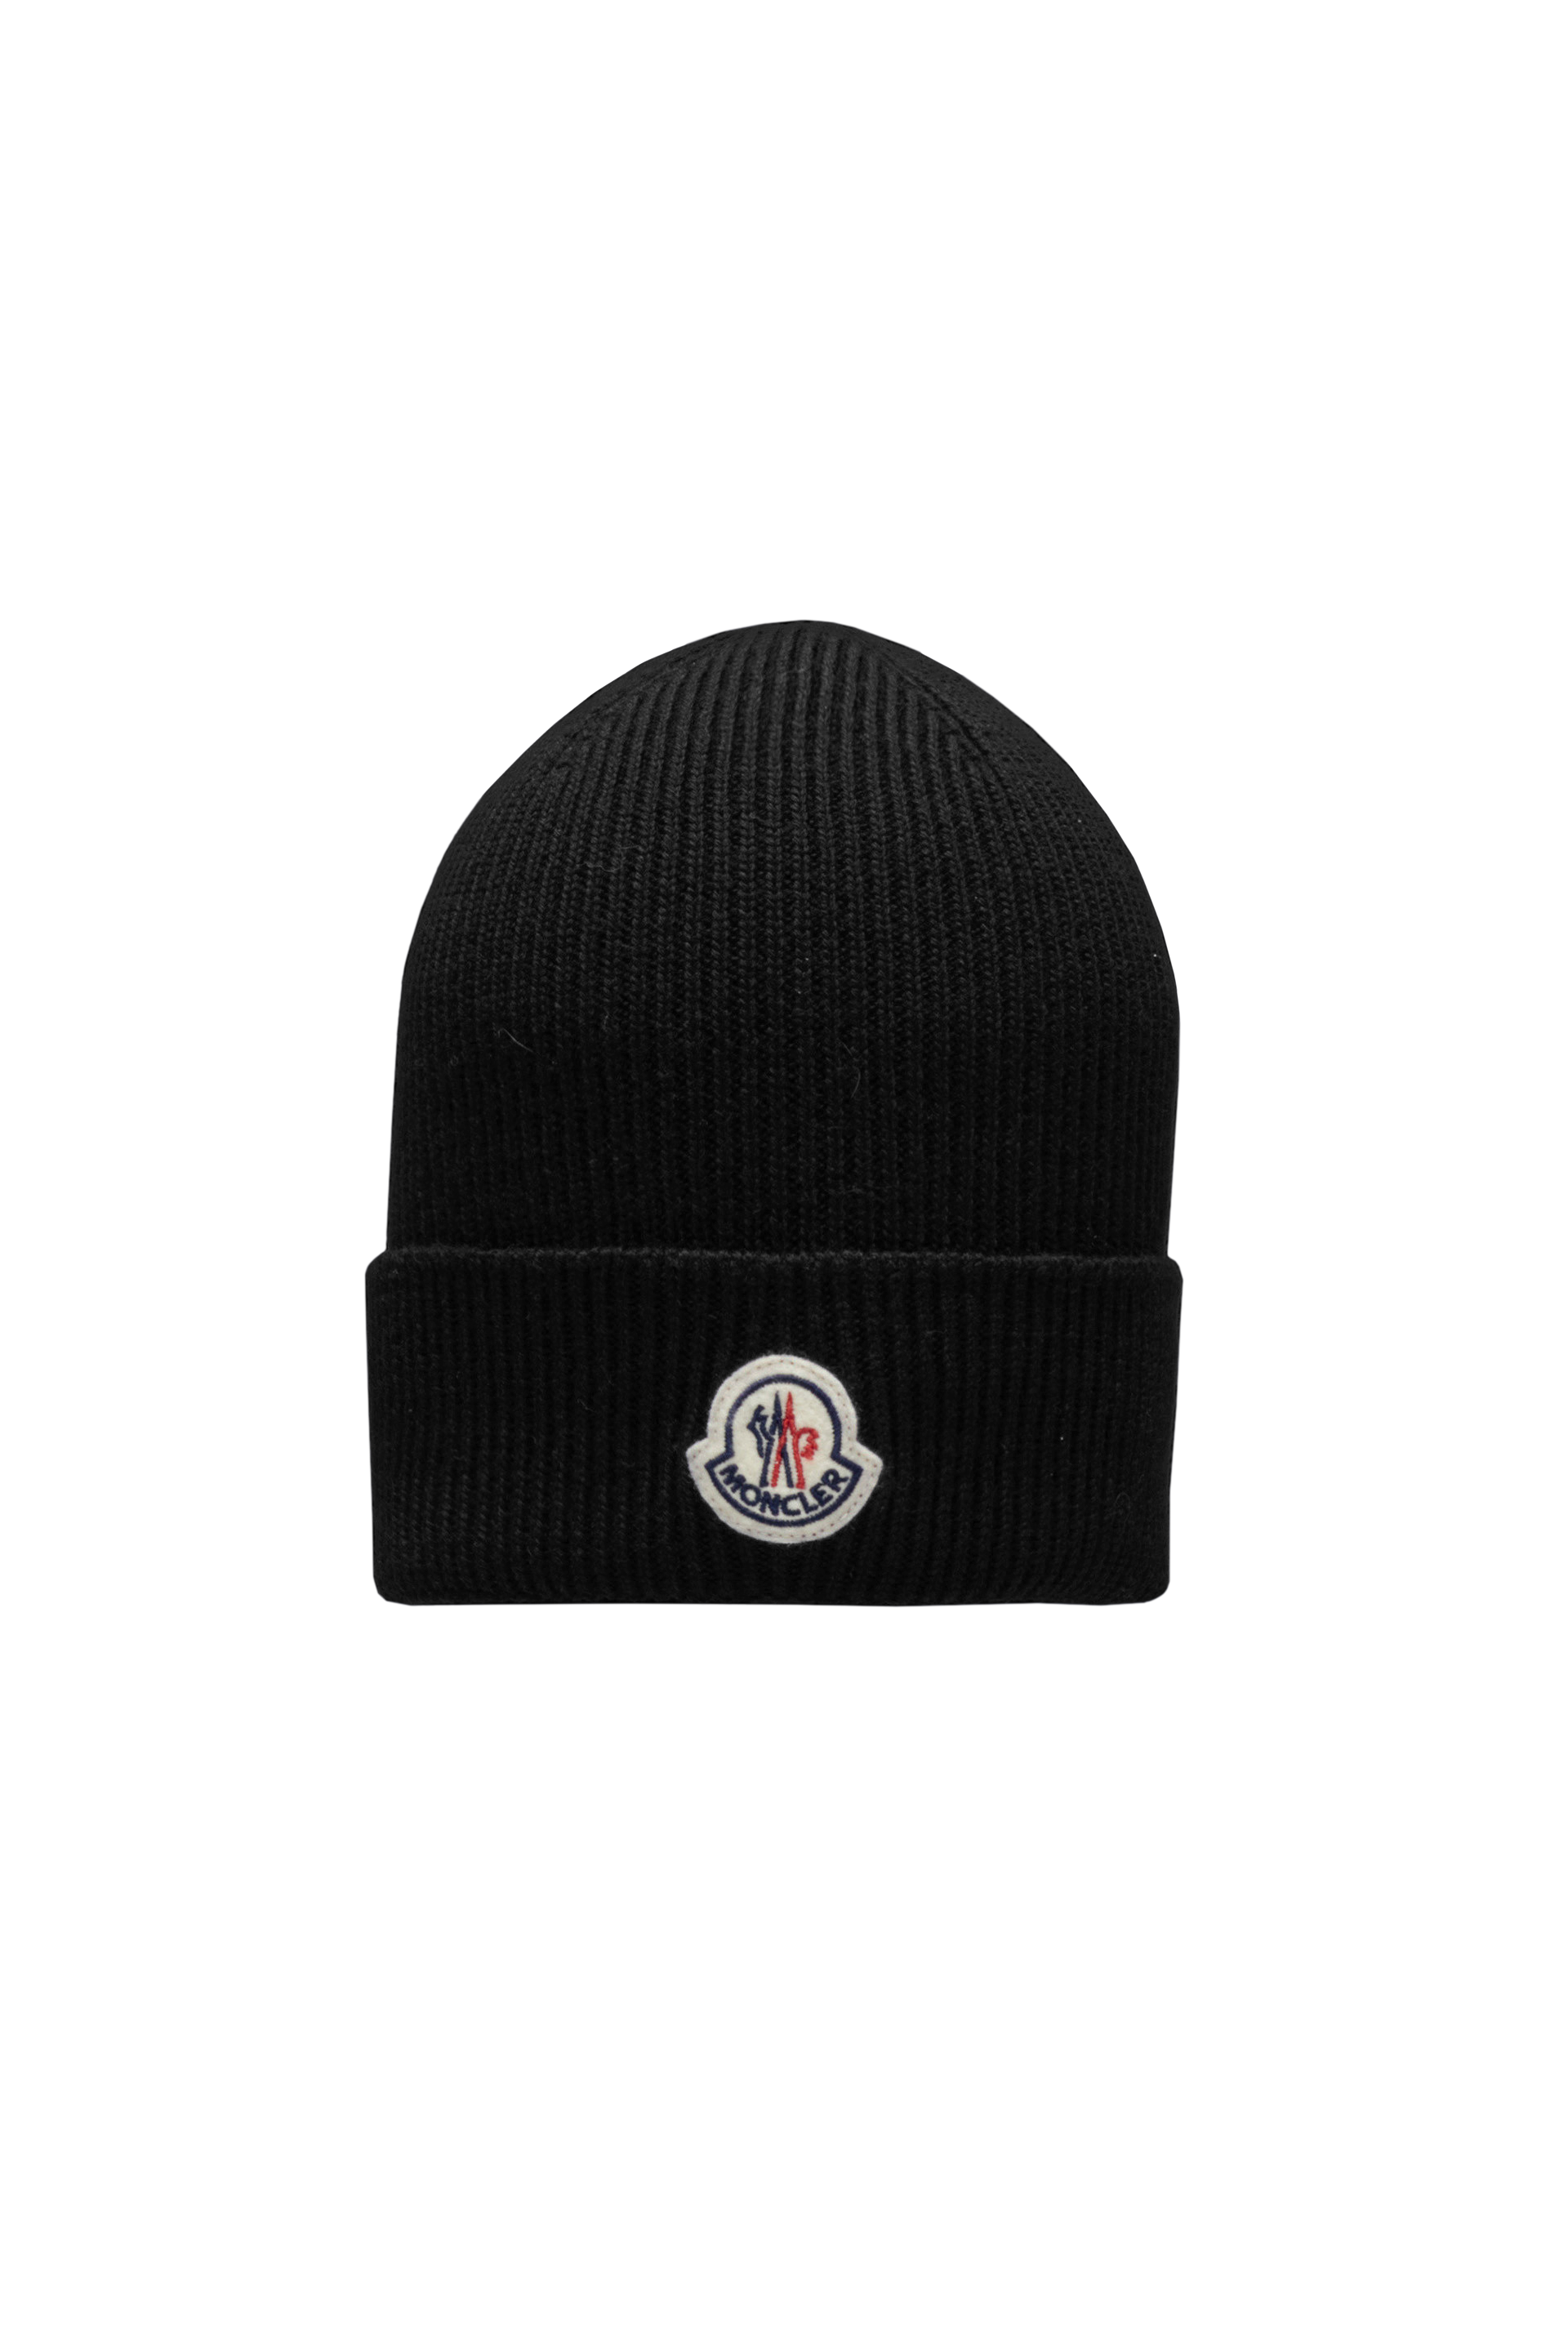 Moncler Collection Wool Beanie Black Size One Size